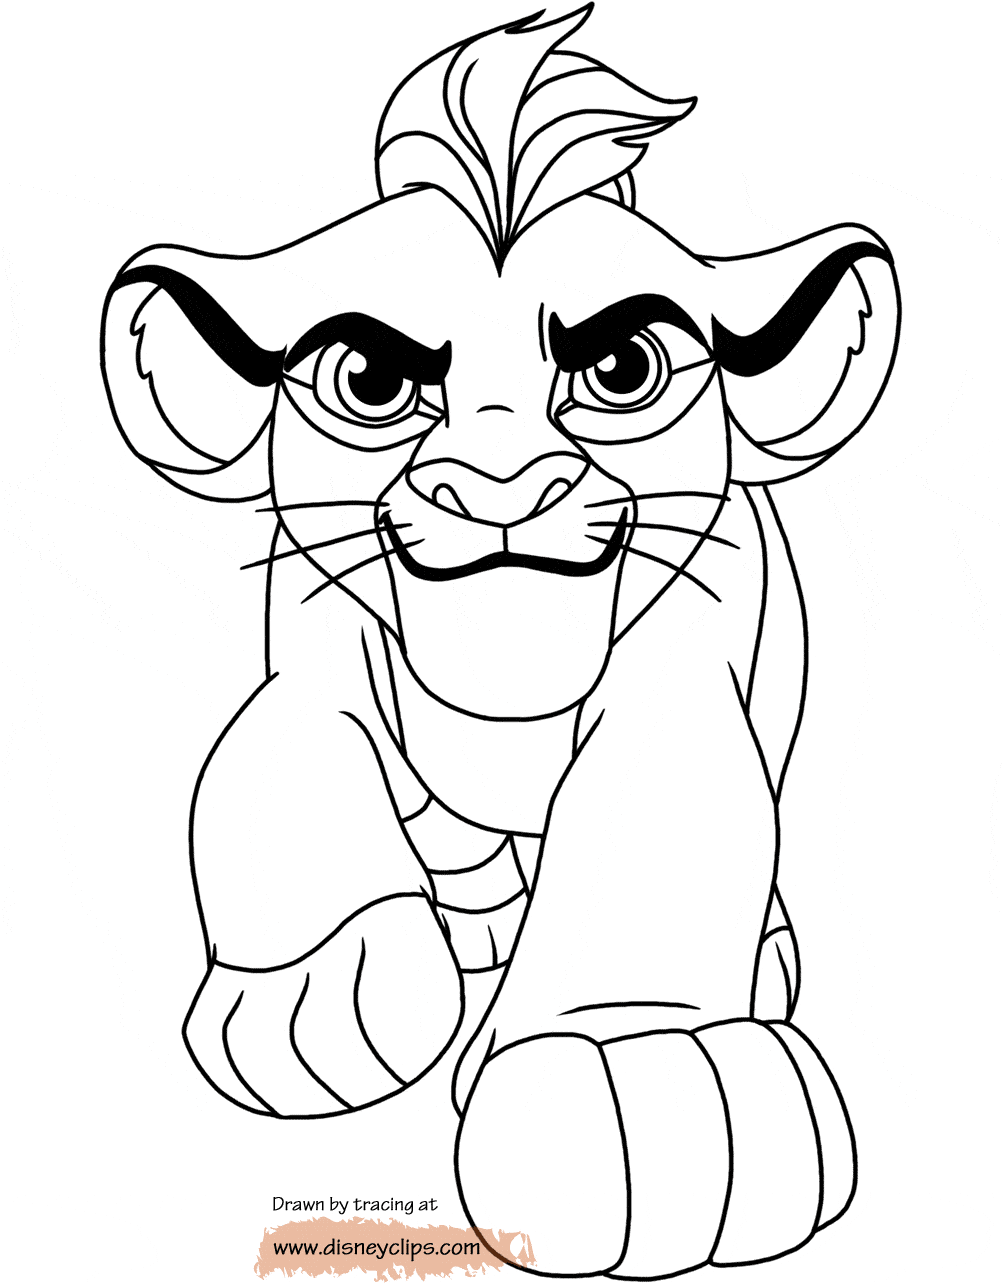 colouring pages lion guard the lion guard birthday party ideas and themed supplies lion guard pages colouring 